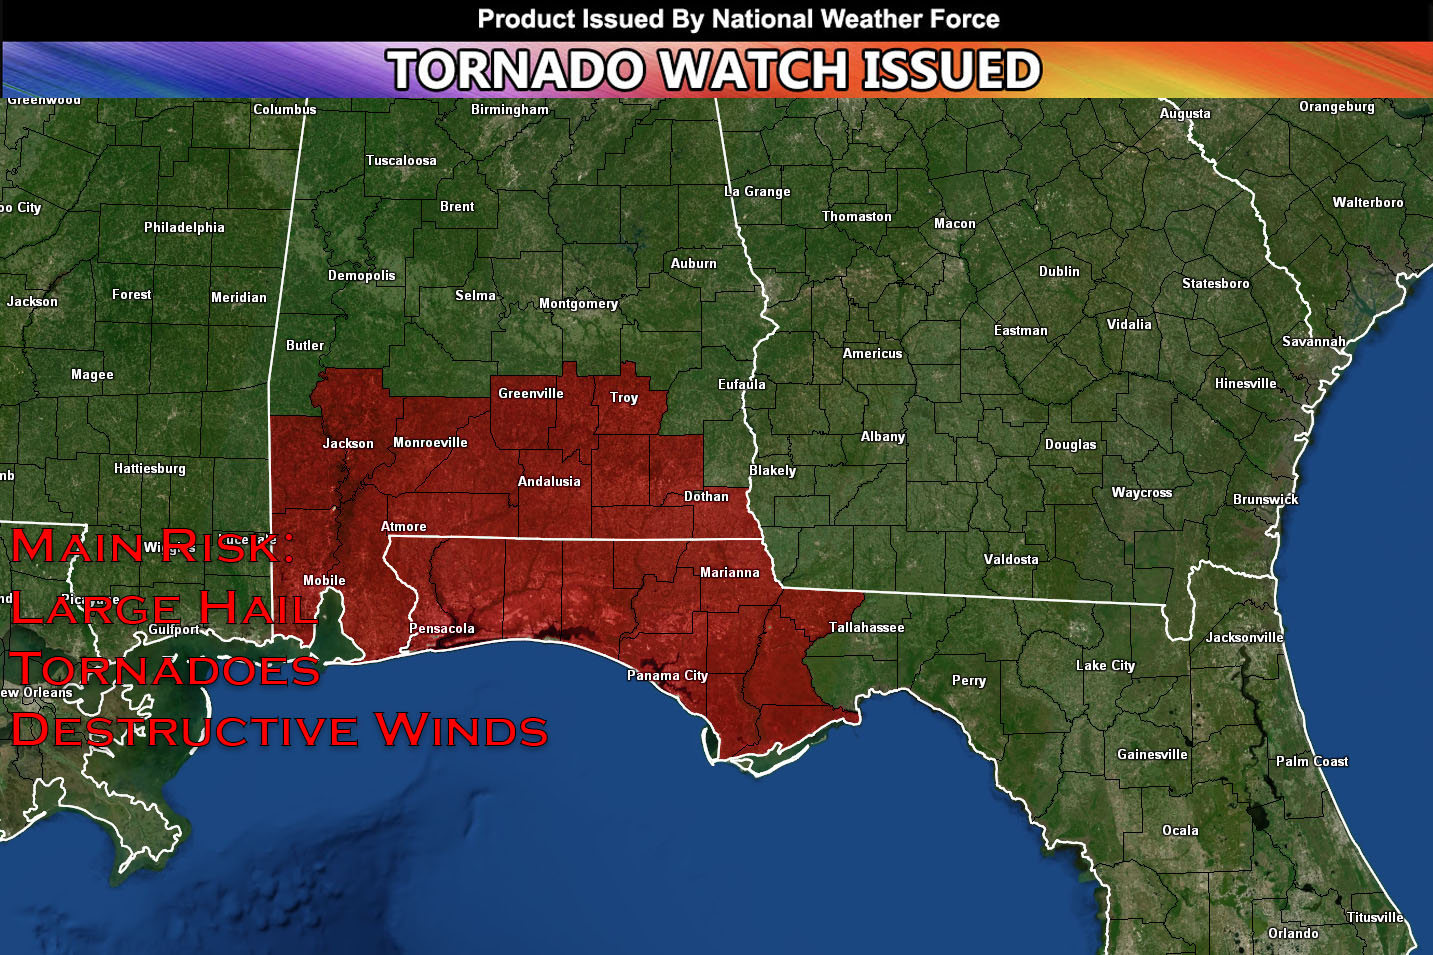 Tornado Watch Issued for Extreme Southern Alabama & Northwest Florida until 12am EDT